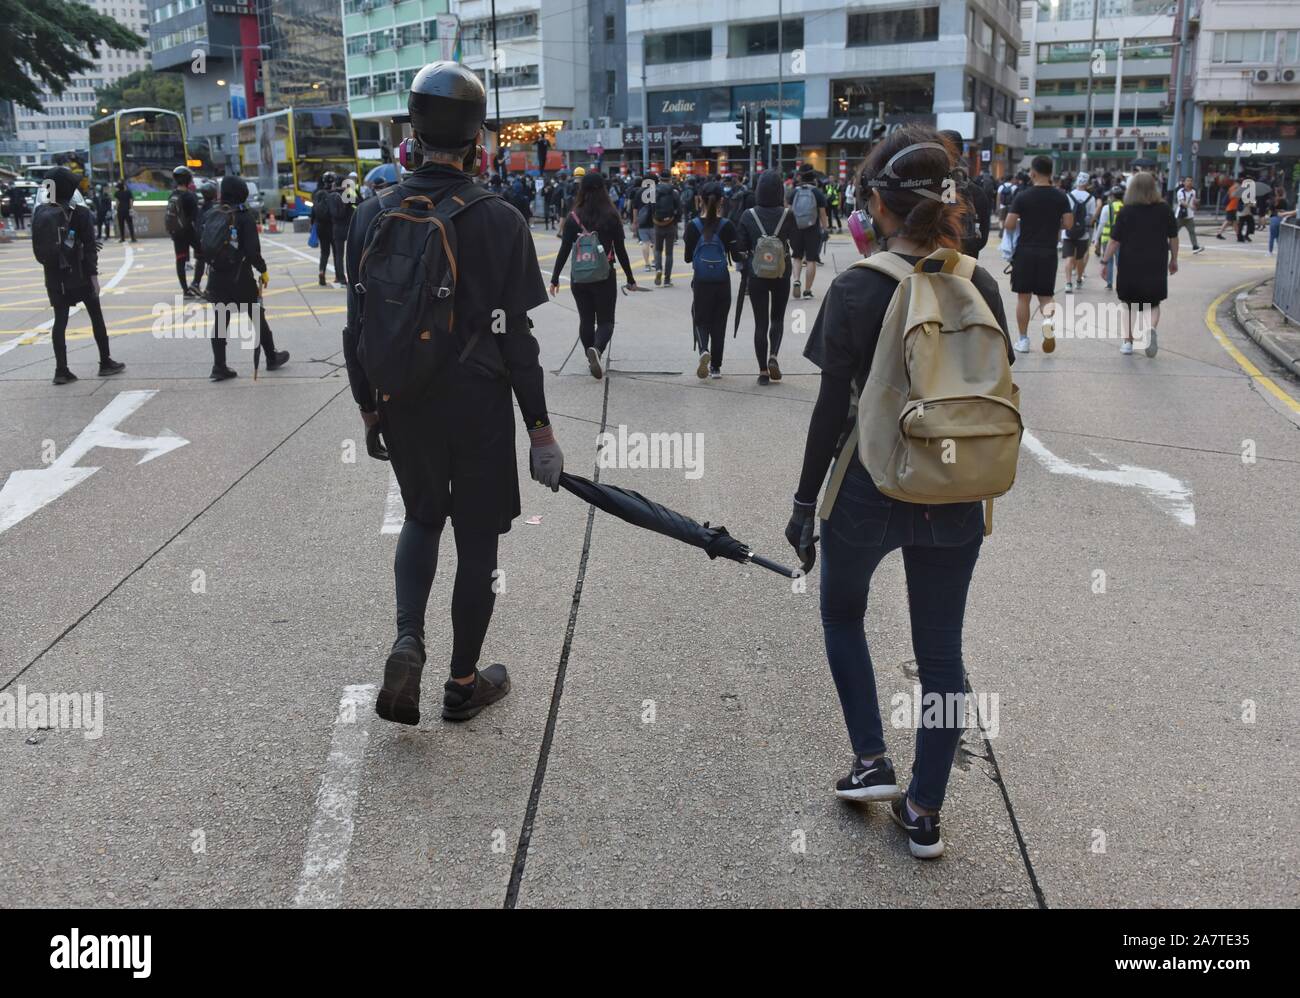 November 2, 2019, Hong Kong, China: Protesters hold an umbrella during the demonstration..The pro-democracy movement was originated with the outcry against the extradition bill. Hong Kong has entered 22nd week continued mass protests. (Credit Image: © Miguel Candela/SOPA Images via ZUMA Wire) Stock Photo